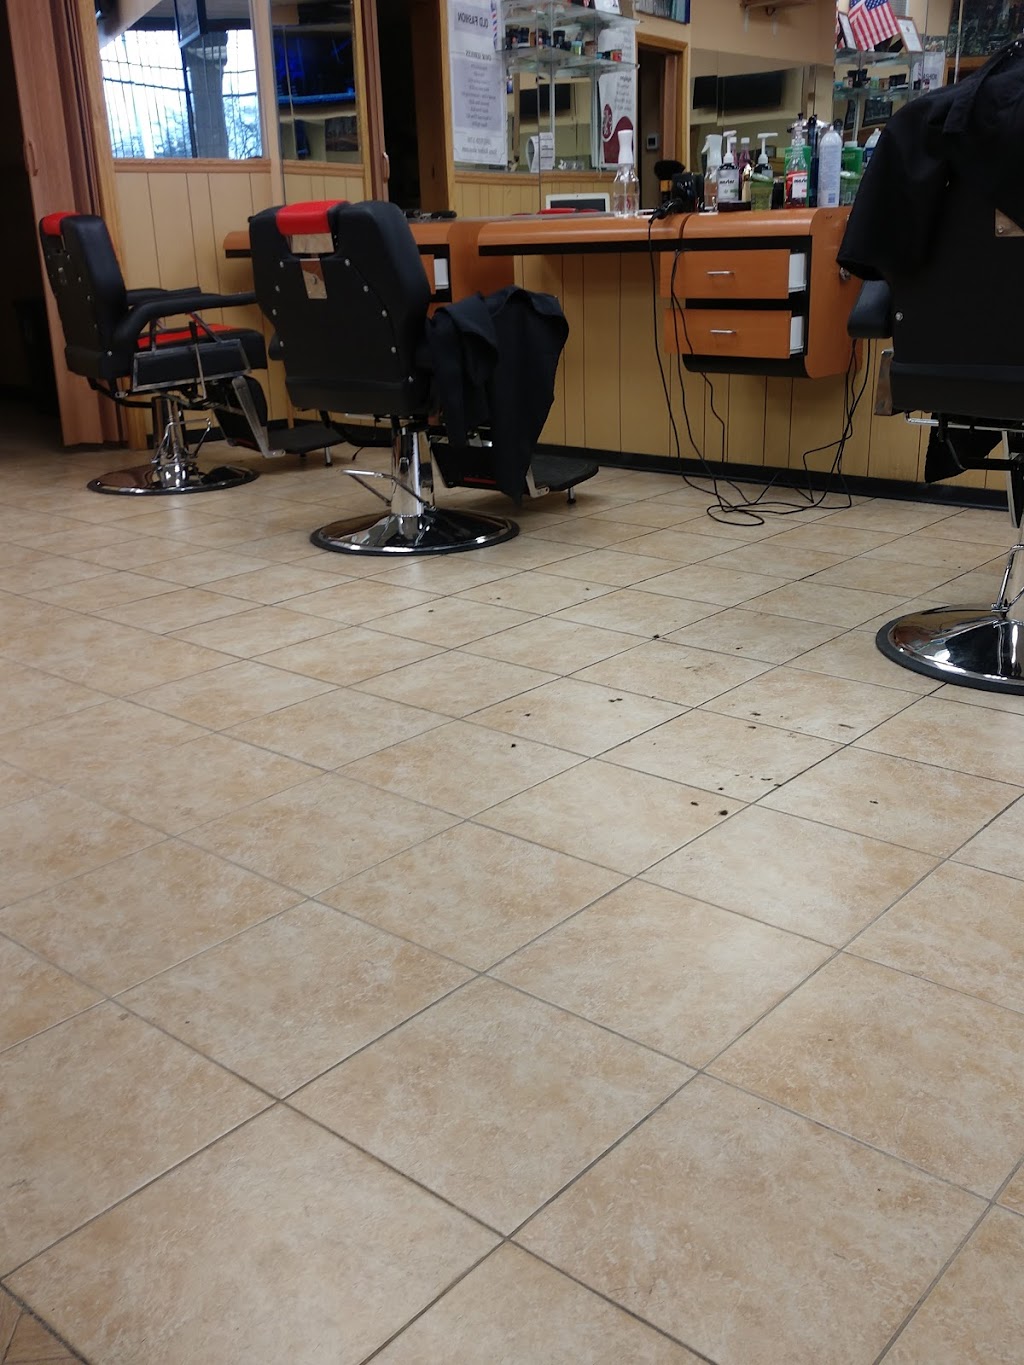 Stans Barber Shop | 102 N Middletown Rd, Pearl River, NY 10965 | Phone: (845) 920-1700